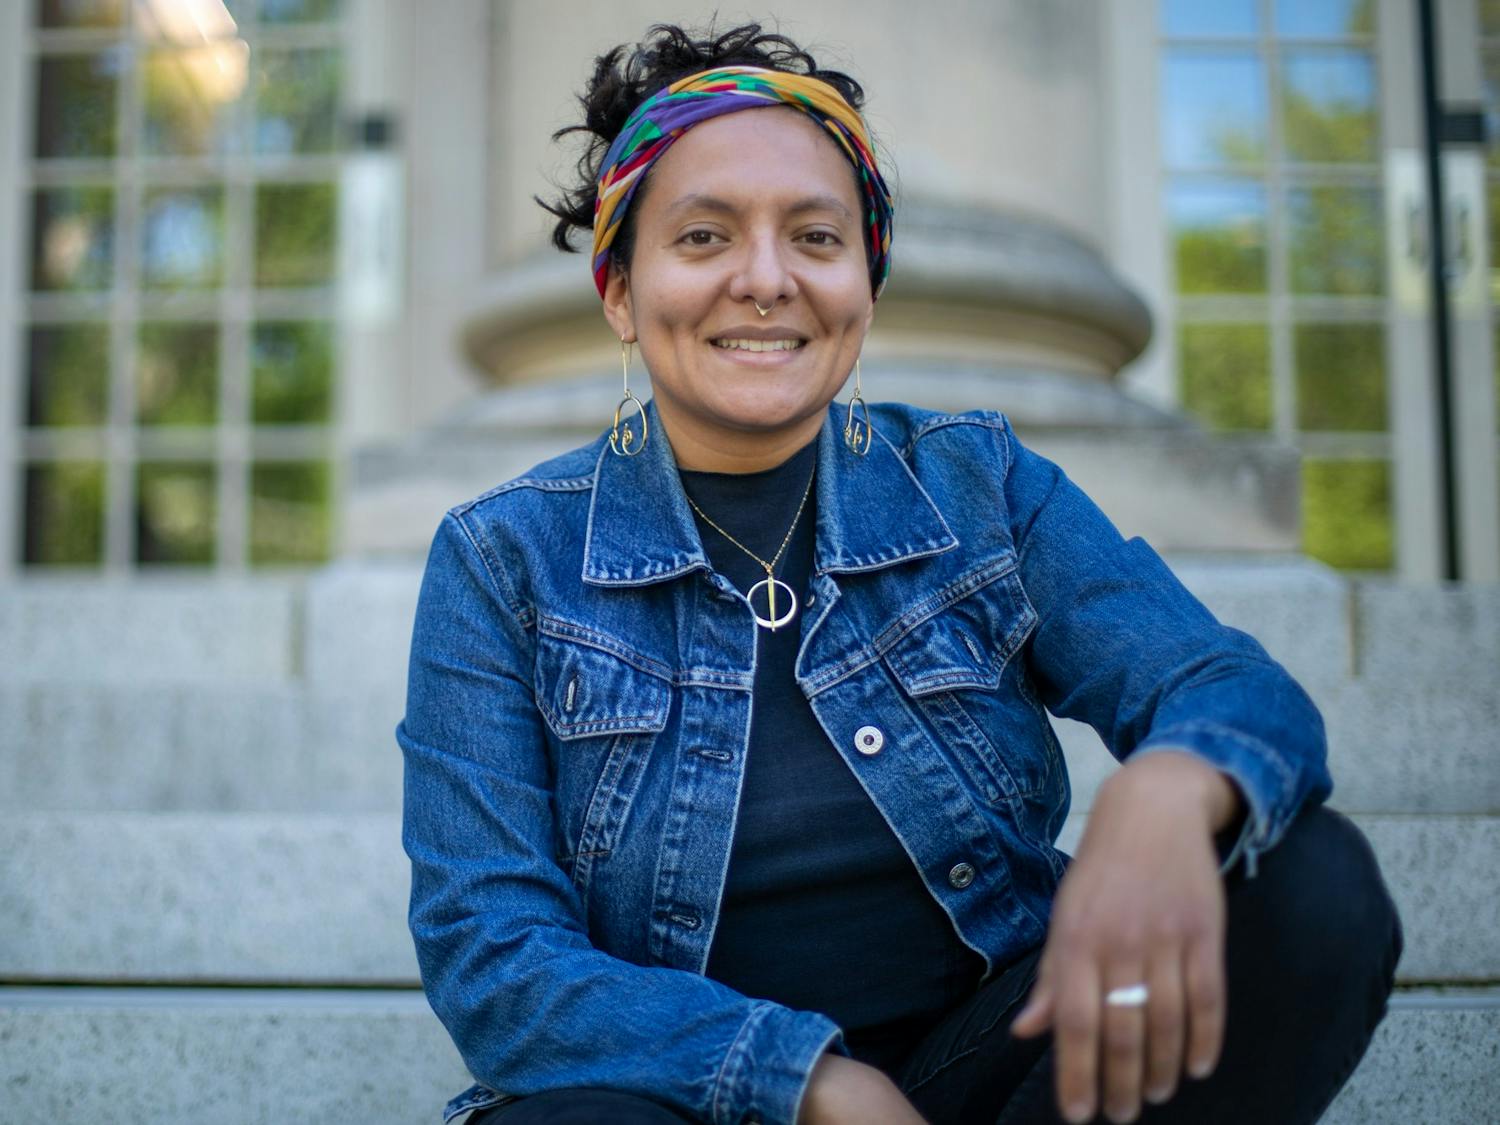 Alex M. Sanchez, 29, poses in front of Carroll Hall on Tuesday, April 19, 2022. Sanchez plans to use the grant money she has won to tell the story of her family's immigration from Nicaragua to the U.S. in 1985. "Our country is made up of immigrants," said Sanchez, "and I'm excited to see my aunt and my mom tell their story."